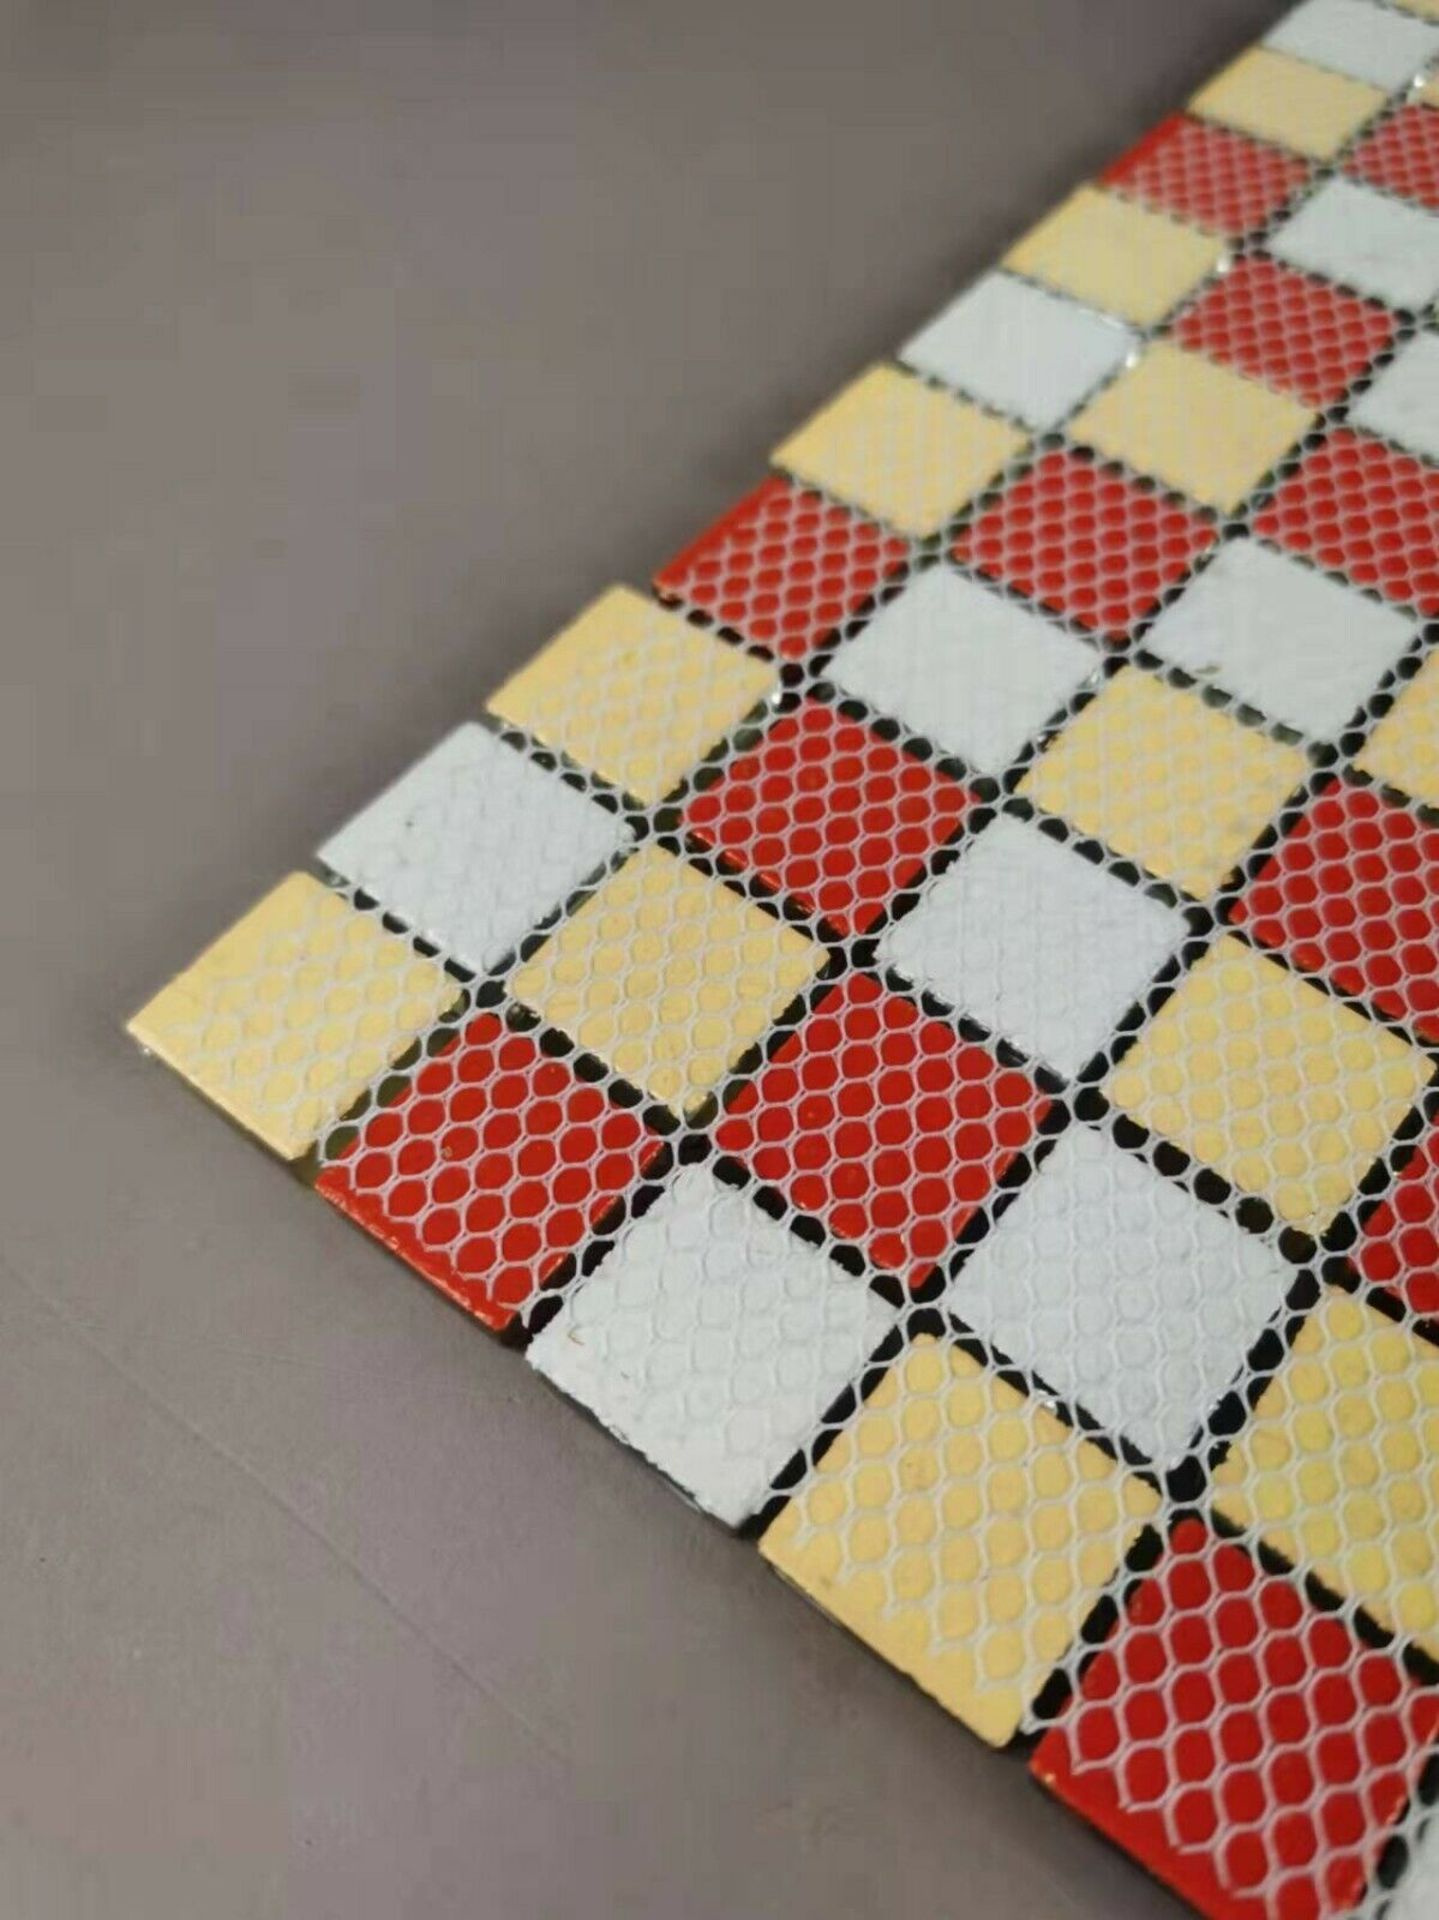 Stock Clearance High Quality Glass/Stainless Steel Mosaic Tiles - 11 Sheets - One Square Metre - Image 3 of 4